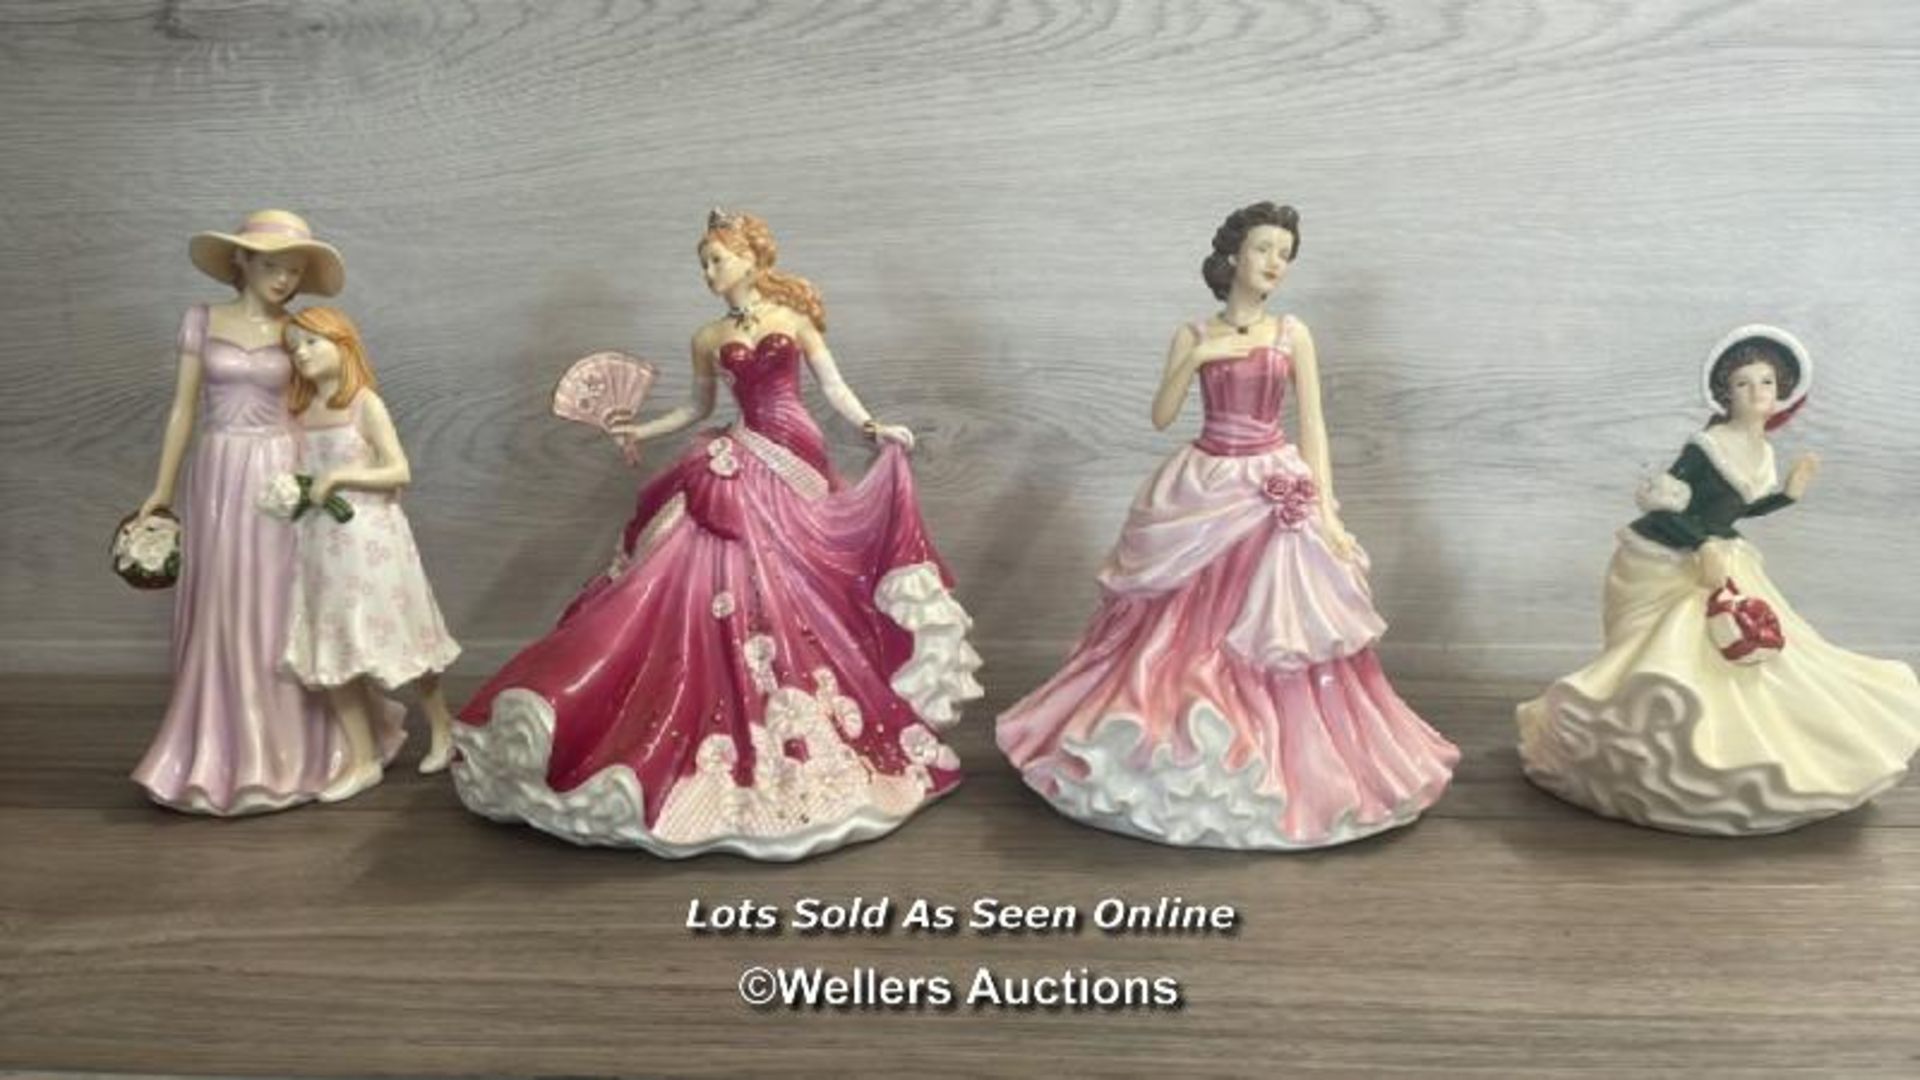 FOUR ROYAL DOULTON FIGURINES - TOGETHERNESS, SWEET ROMANCE, LOVING TOUCH AND CHRISTMAS DAY